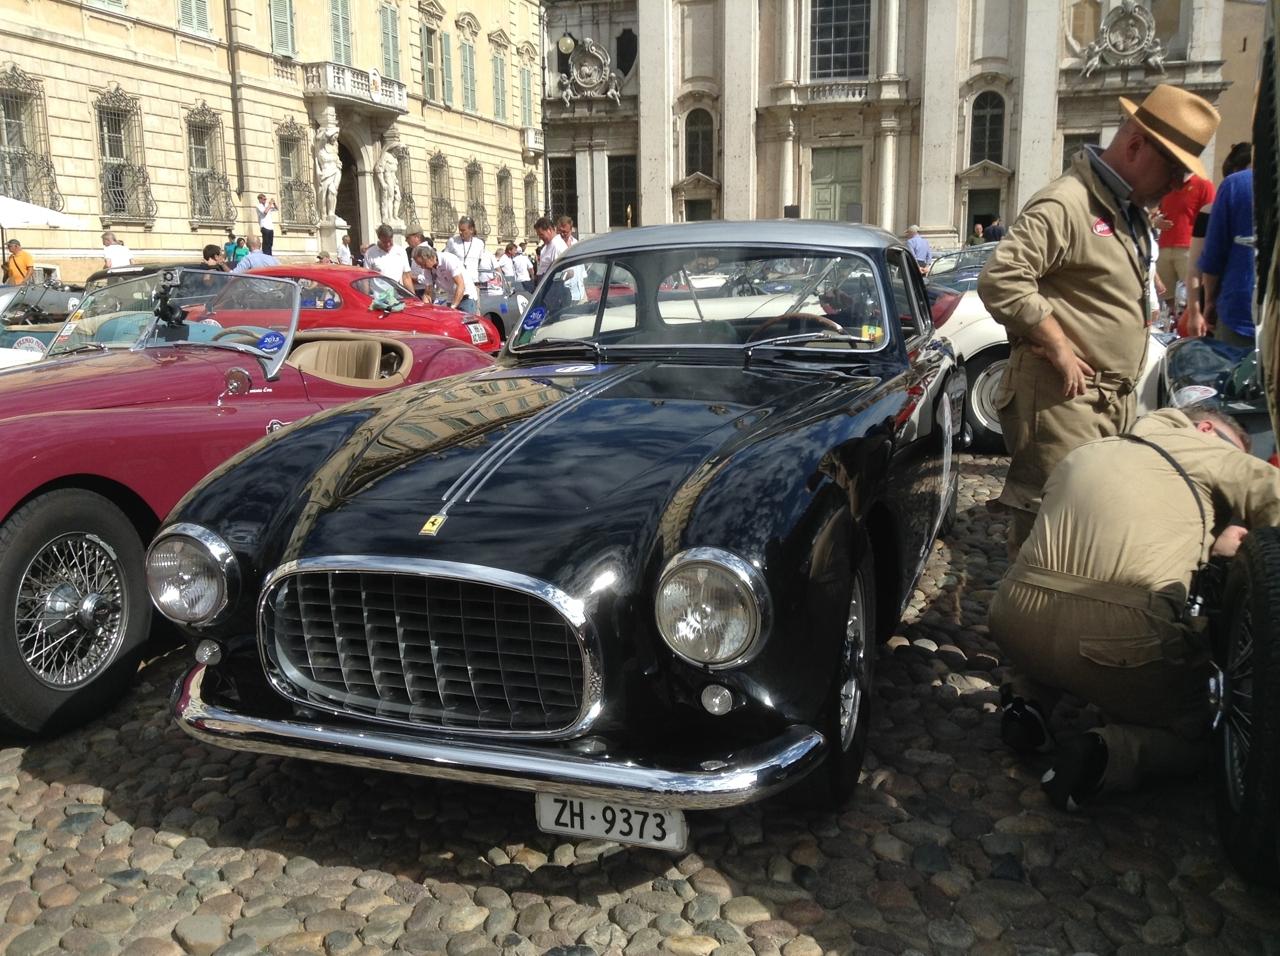 Nuvolari Award 2015, the Ferrari that belonged to Rossellini is now owned by a dentist from Zurich.